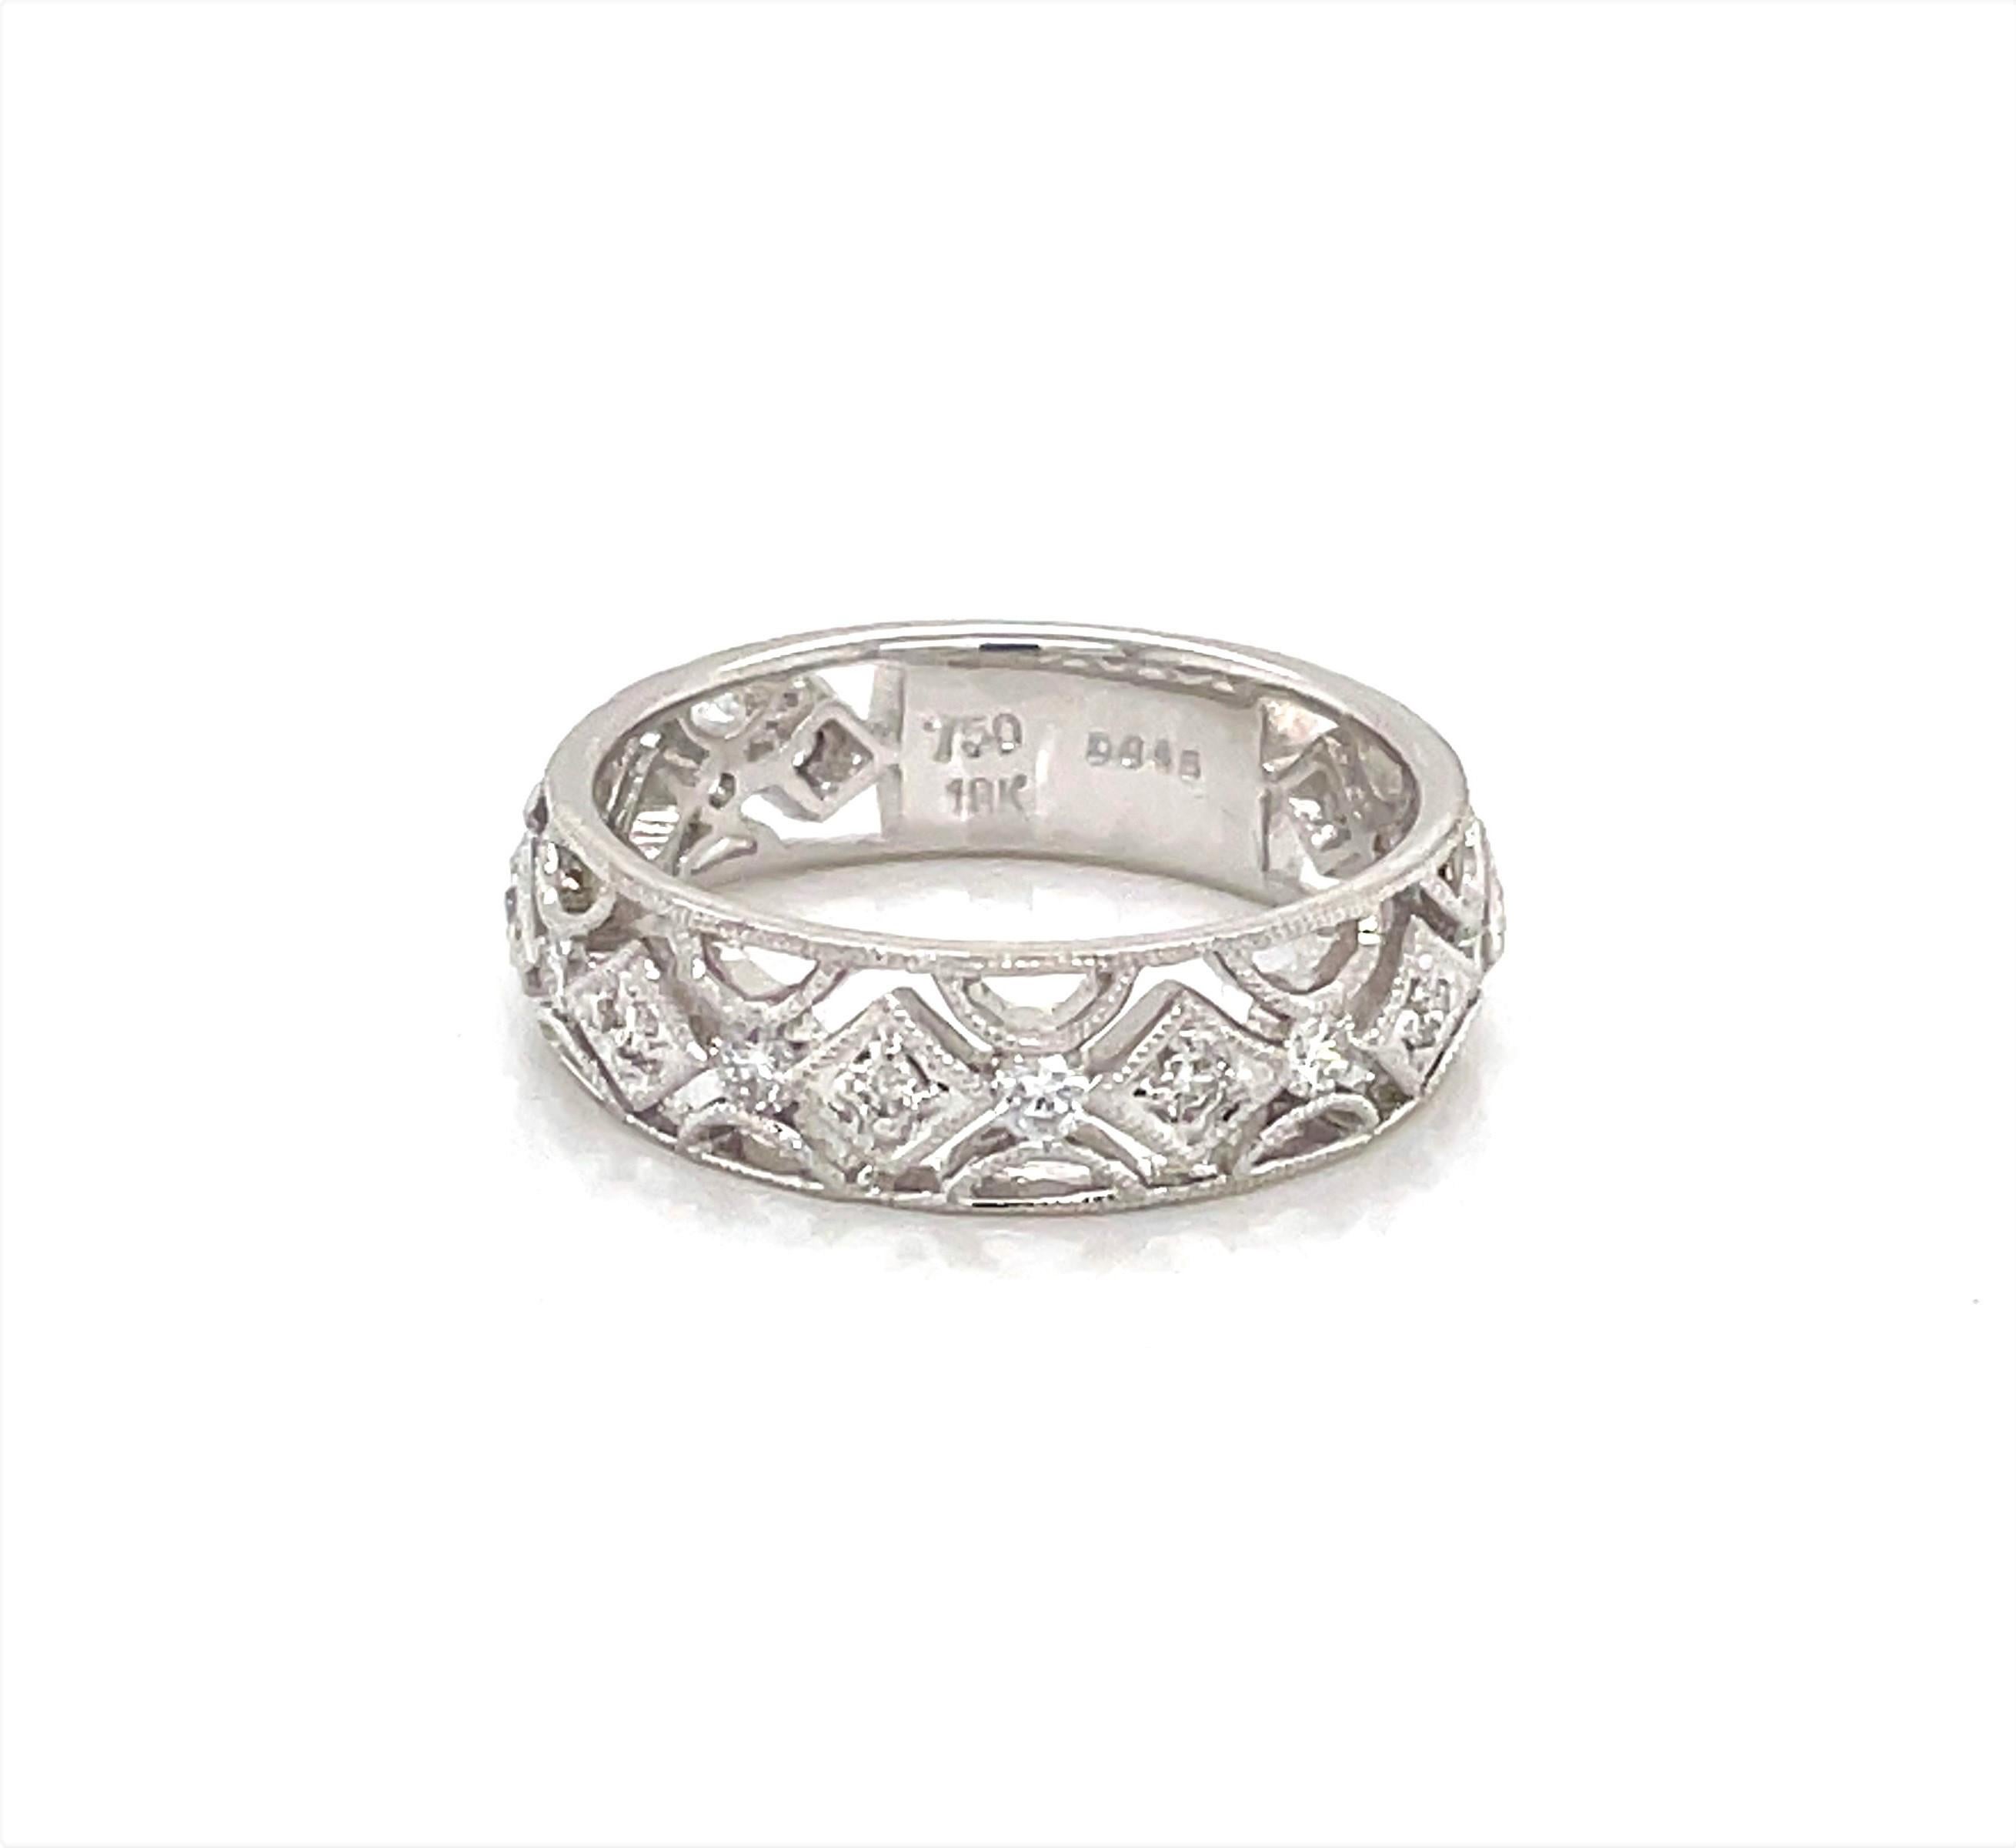 Sixteen diamonds wrapped in elegantly finished filigree with a beaded detail in 18 karat white gold give this vintage inspired ring its sparkle. With .51 carats of round faceted H/VS diamonds, this glistening 5.5mm wide band is thoughtfully suited